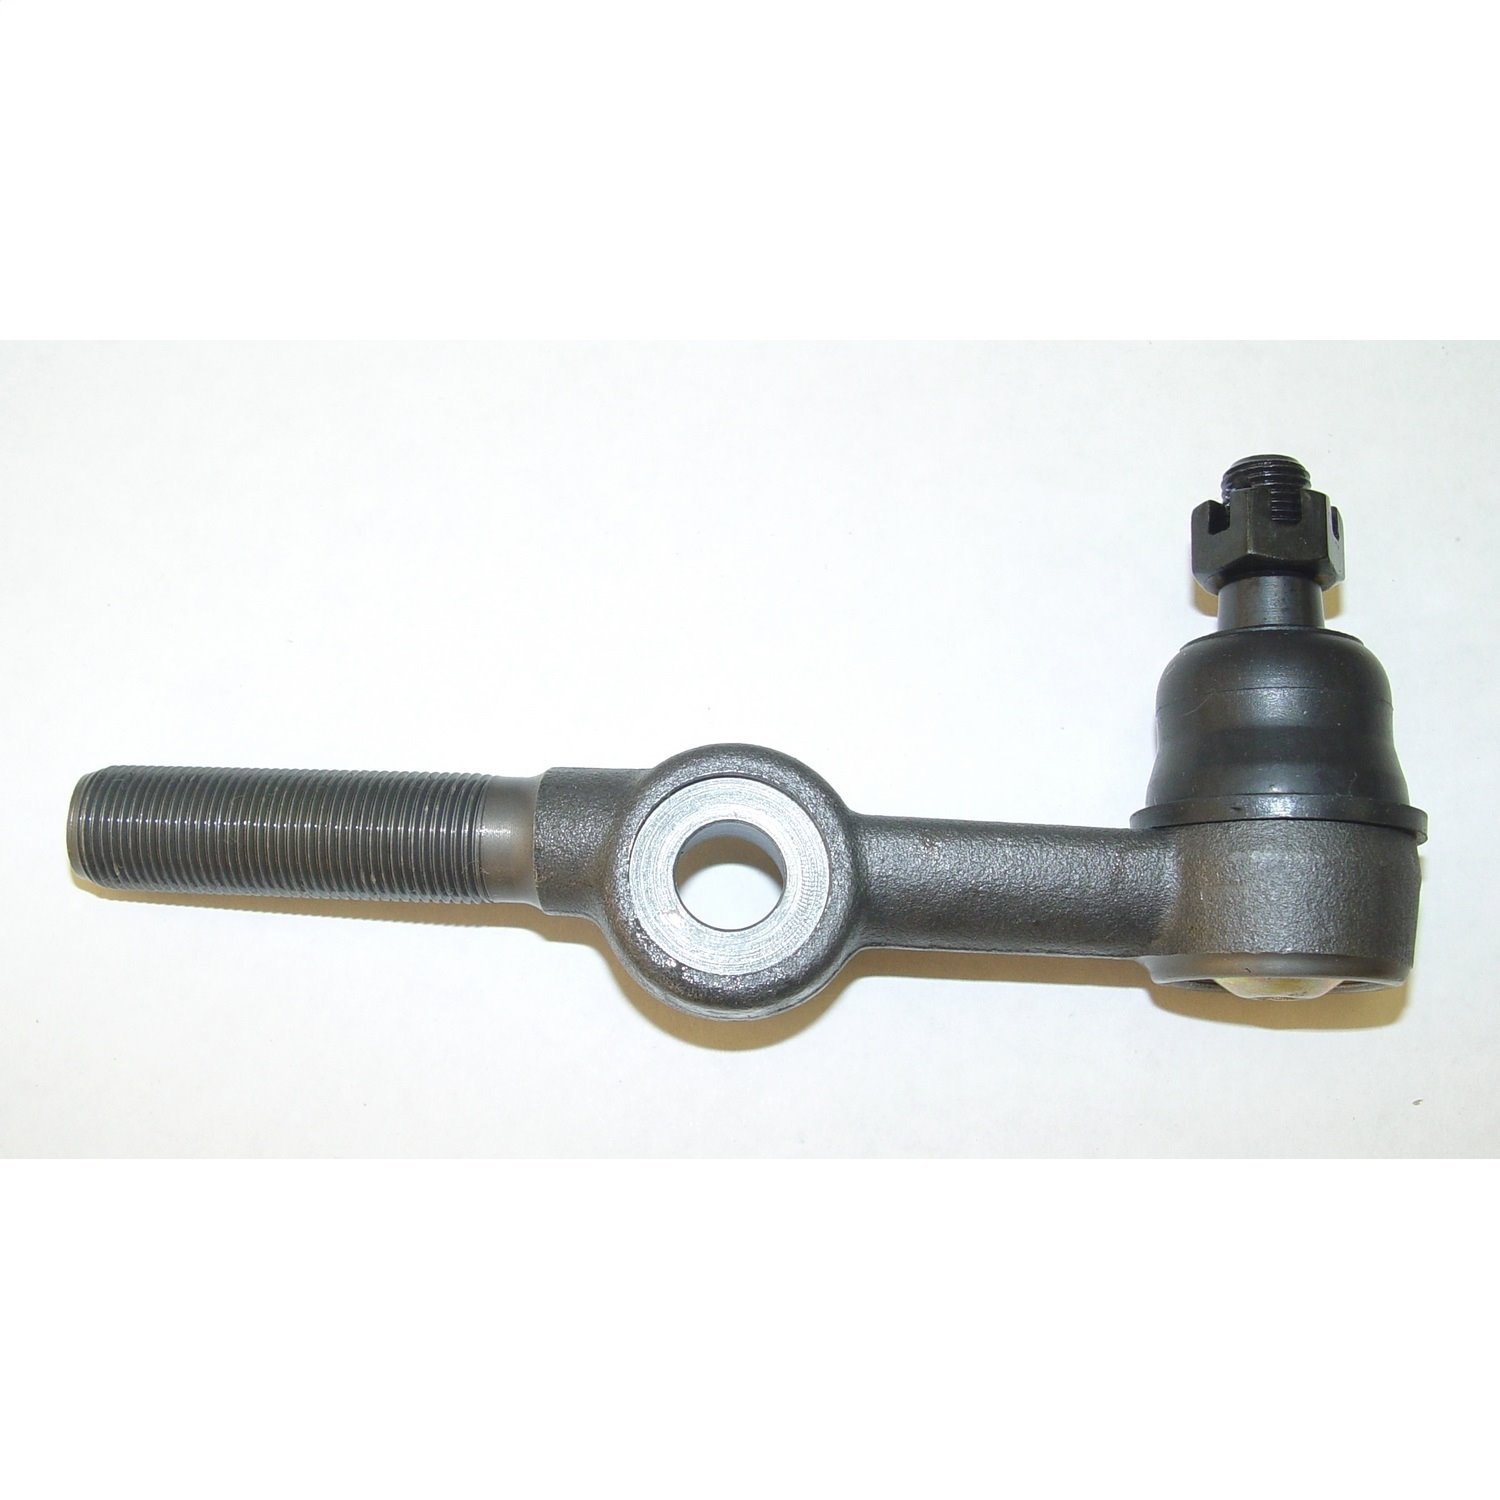 Replacement tie rod end from Omix-ADA, Fits 45-71 Willys and Jeep models with a 4-cylinder engine. Left hand thread.